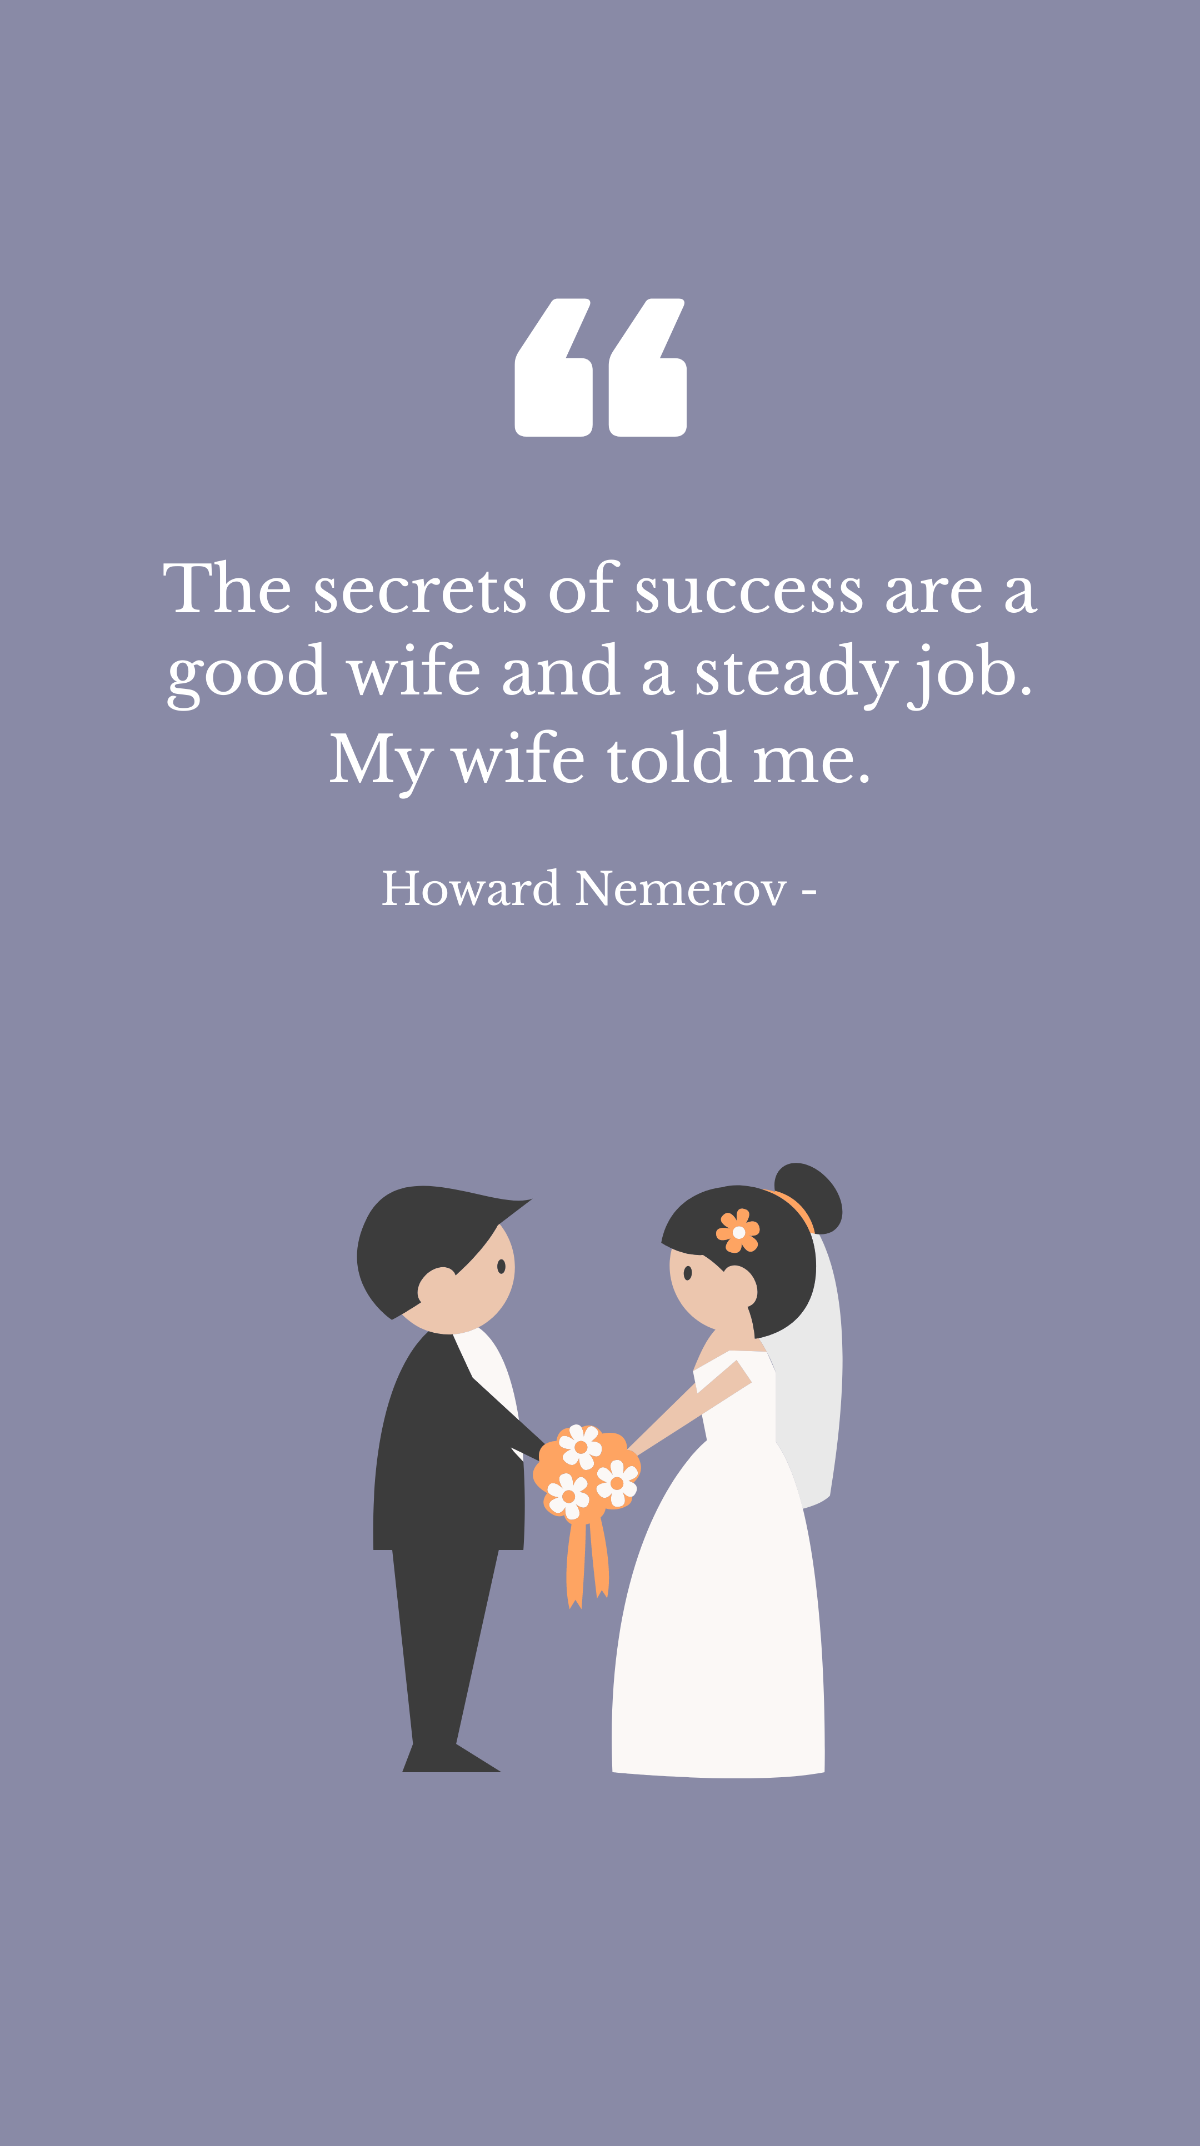 Howard Nemerov - The secrets of success are a good wife and a steady job. My wife told me. Template